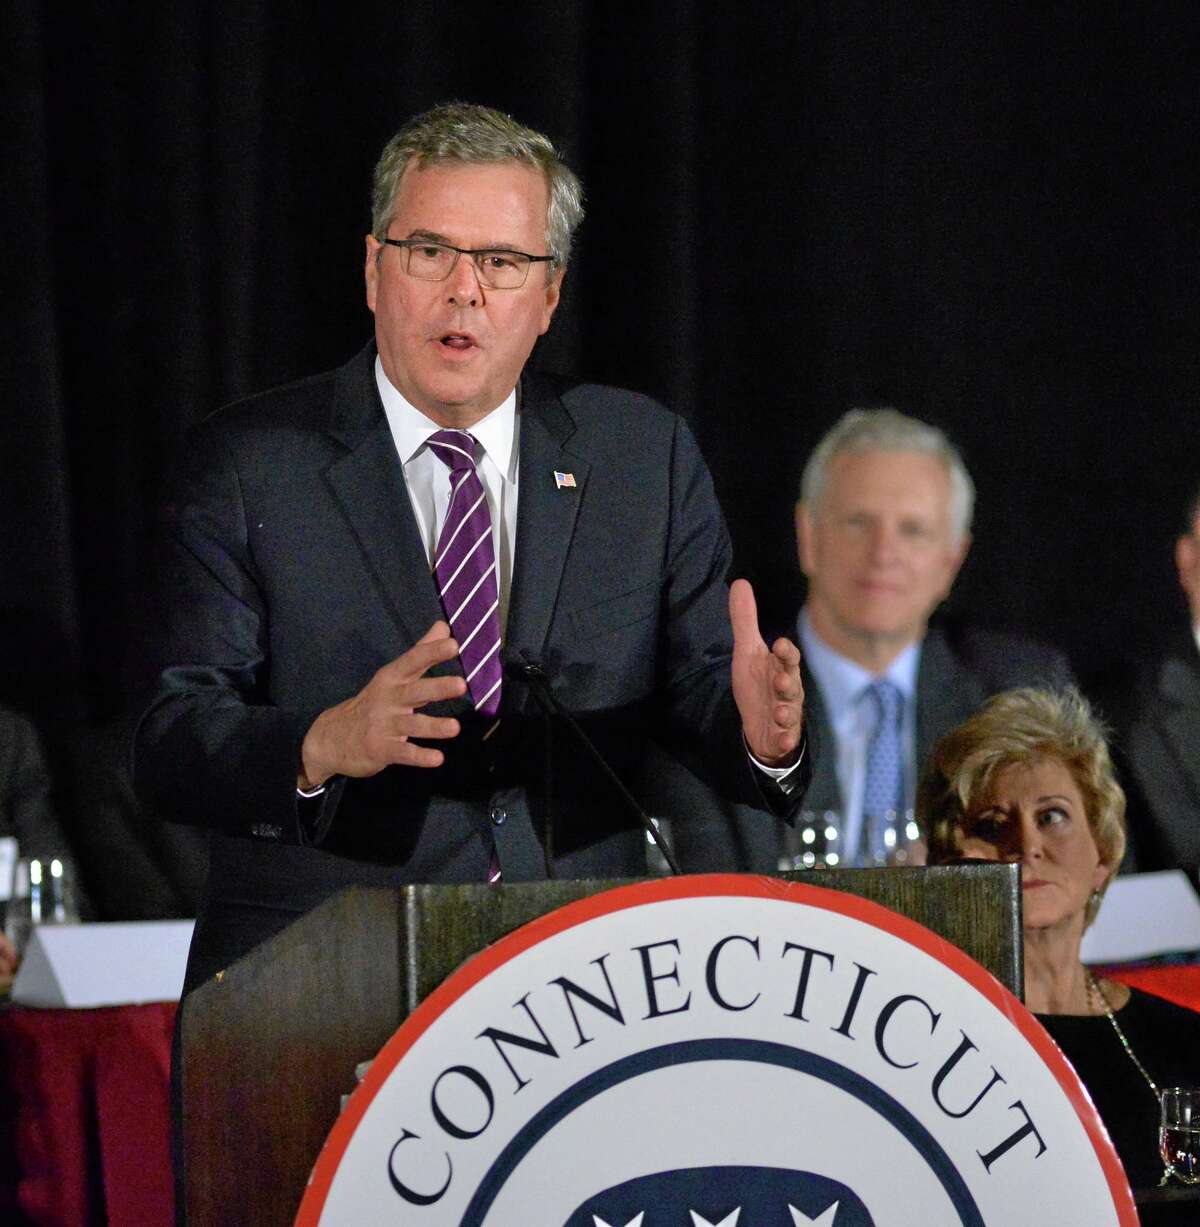 Former Governor of Florida, Jeb Bush, speaks during the 36th annual Prescott Bush Awards Dinner at the Stamford Hilton, Stamford, Conn., Thursday night, April 10, 2014. The Connecticut Republican Party bestowed two-time U.S. Senate candidate Linda McMahon with its highest honor. The former wrestling executive was chosen as this year's recipient of the Prescott Bush Award, named in honor of the late Prescott Bush Sr. of Greenwich, Conn., a former U.S. Senator and father of former President George H. W. Bush. Former Florida Gov. Jeb Bush, is the grandson of Prescott Bush, was the keynote speaker at the event.